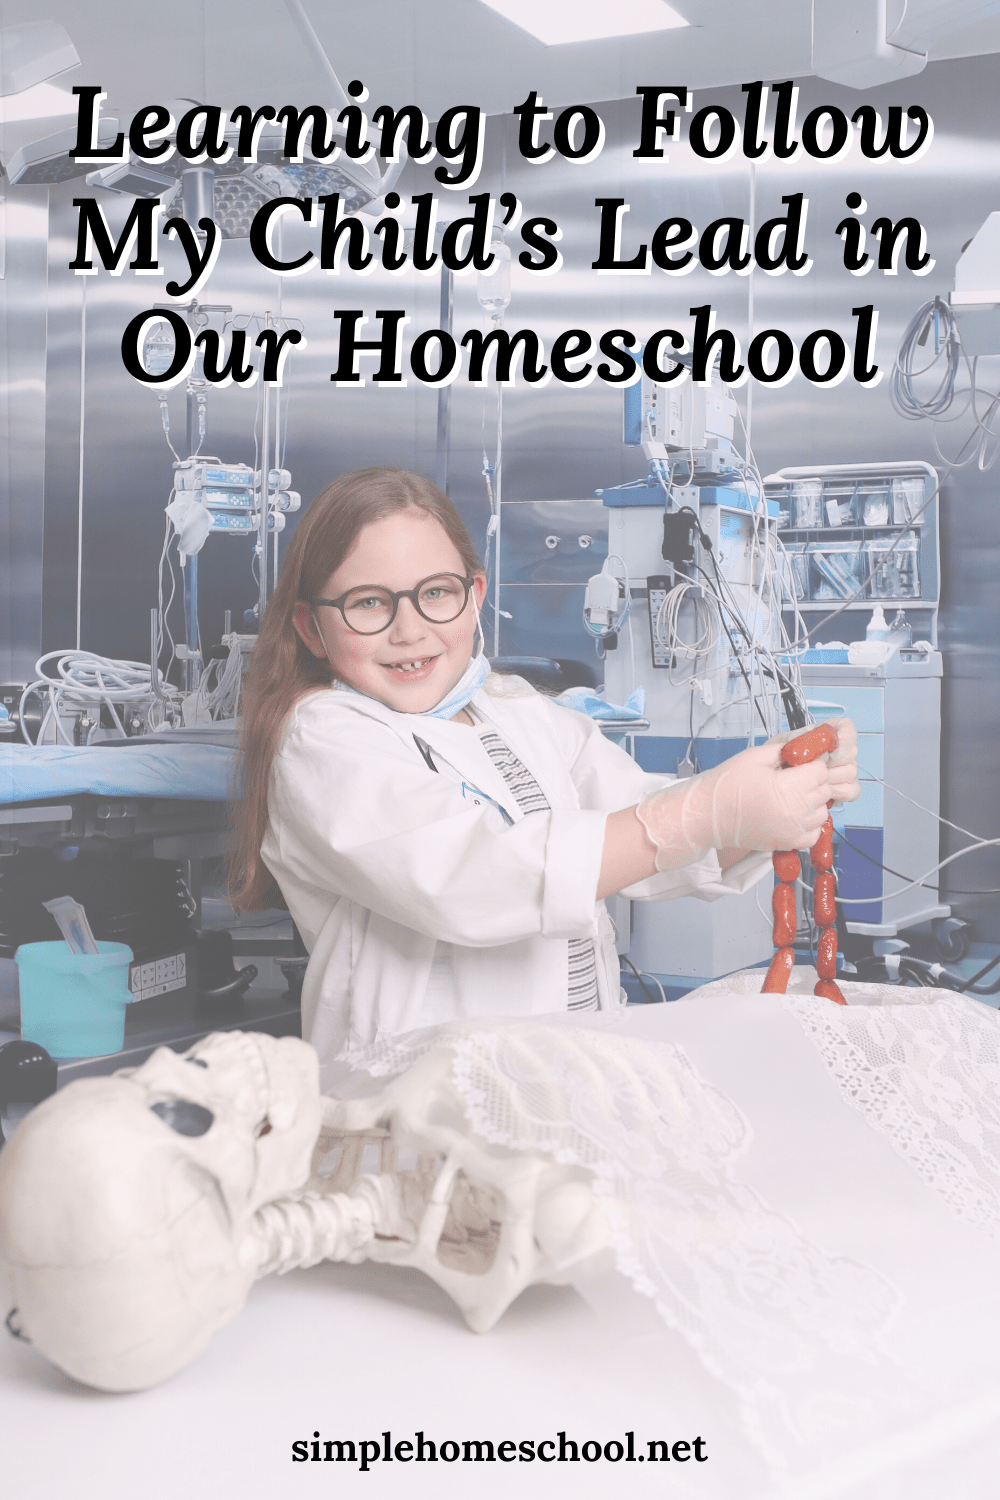 Learning to Follow My Child’s Lead in Our Homeschool